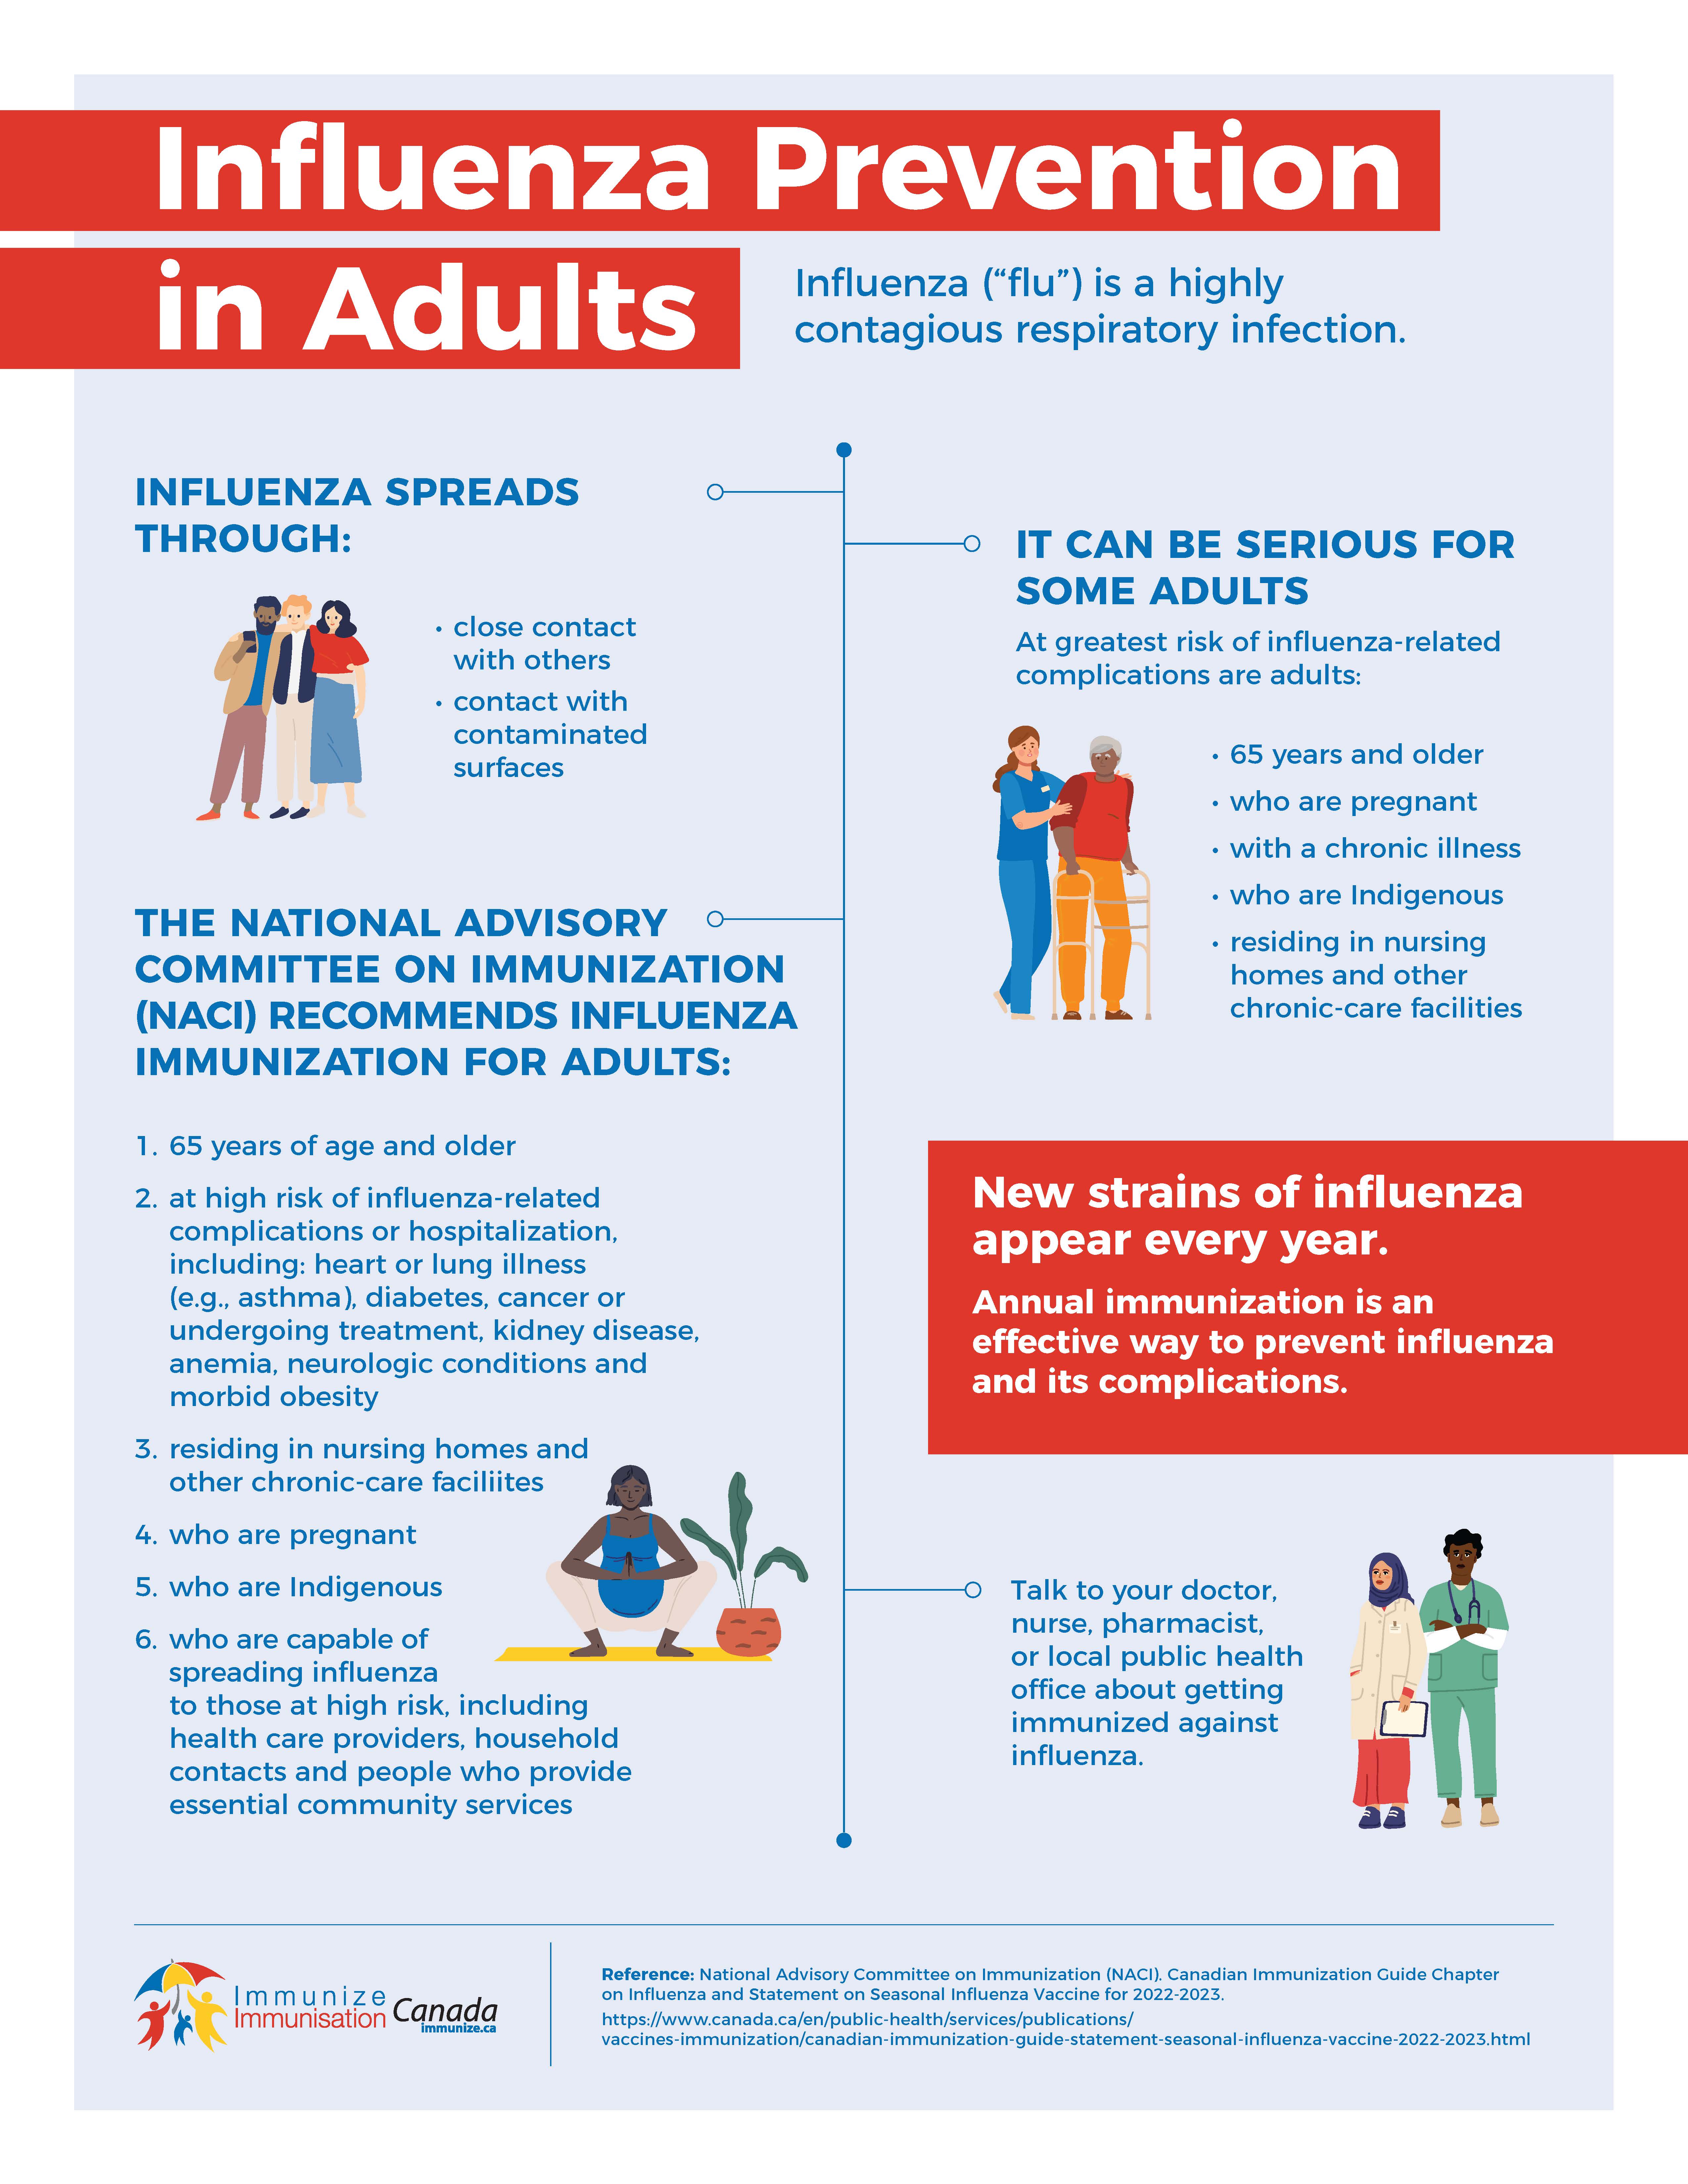 Influenza prevention in adults - infographic